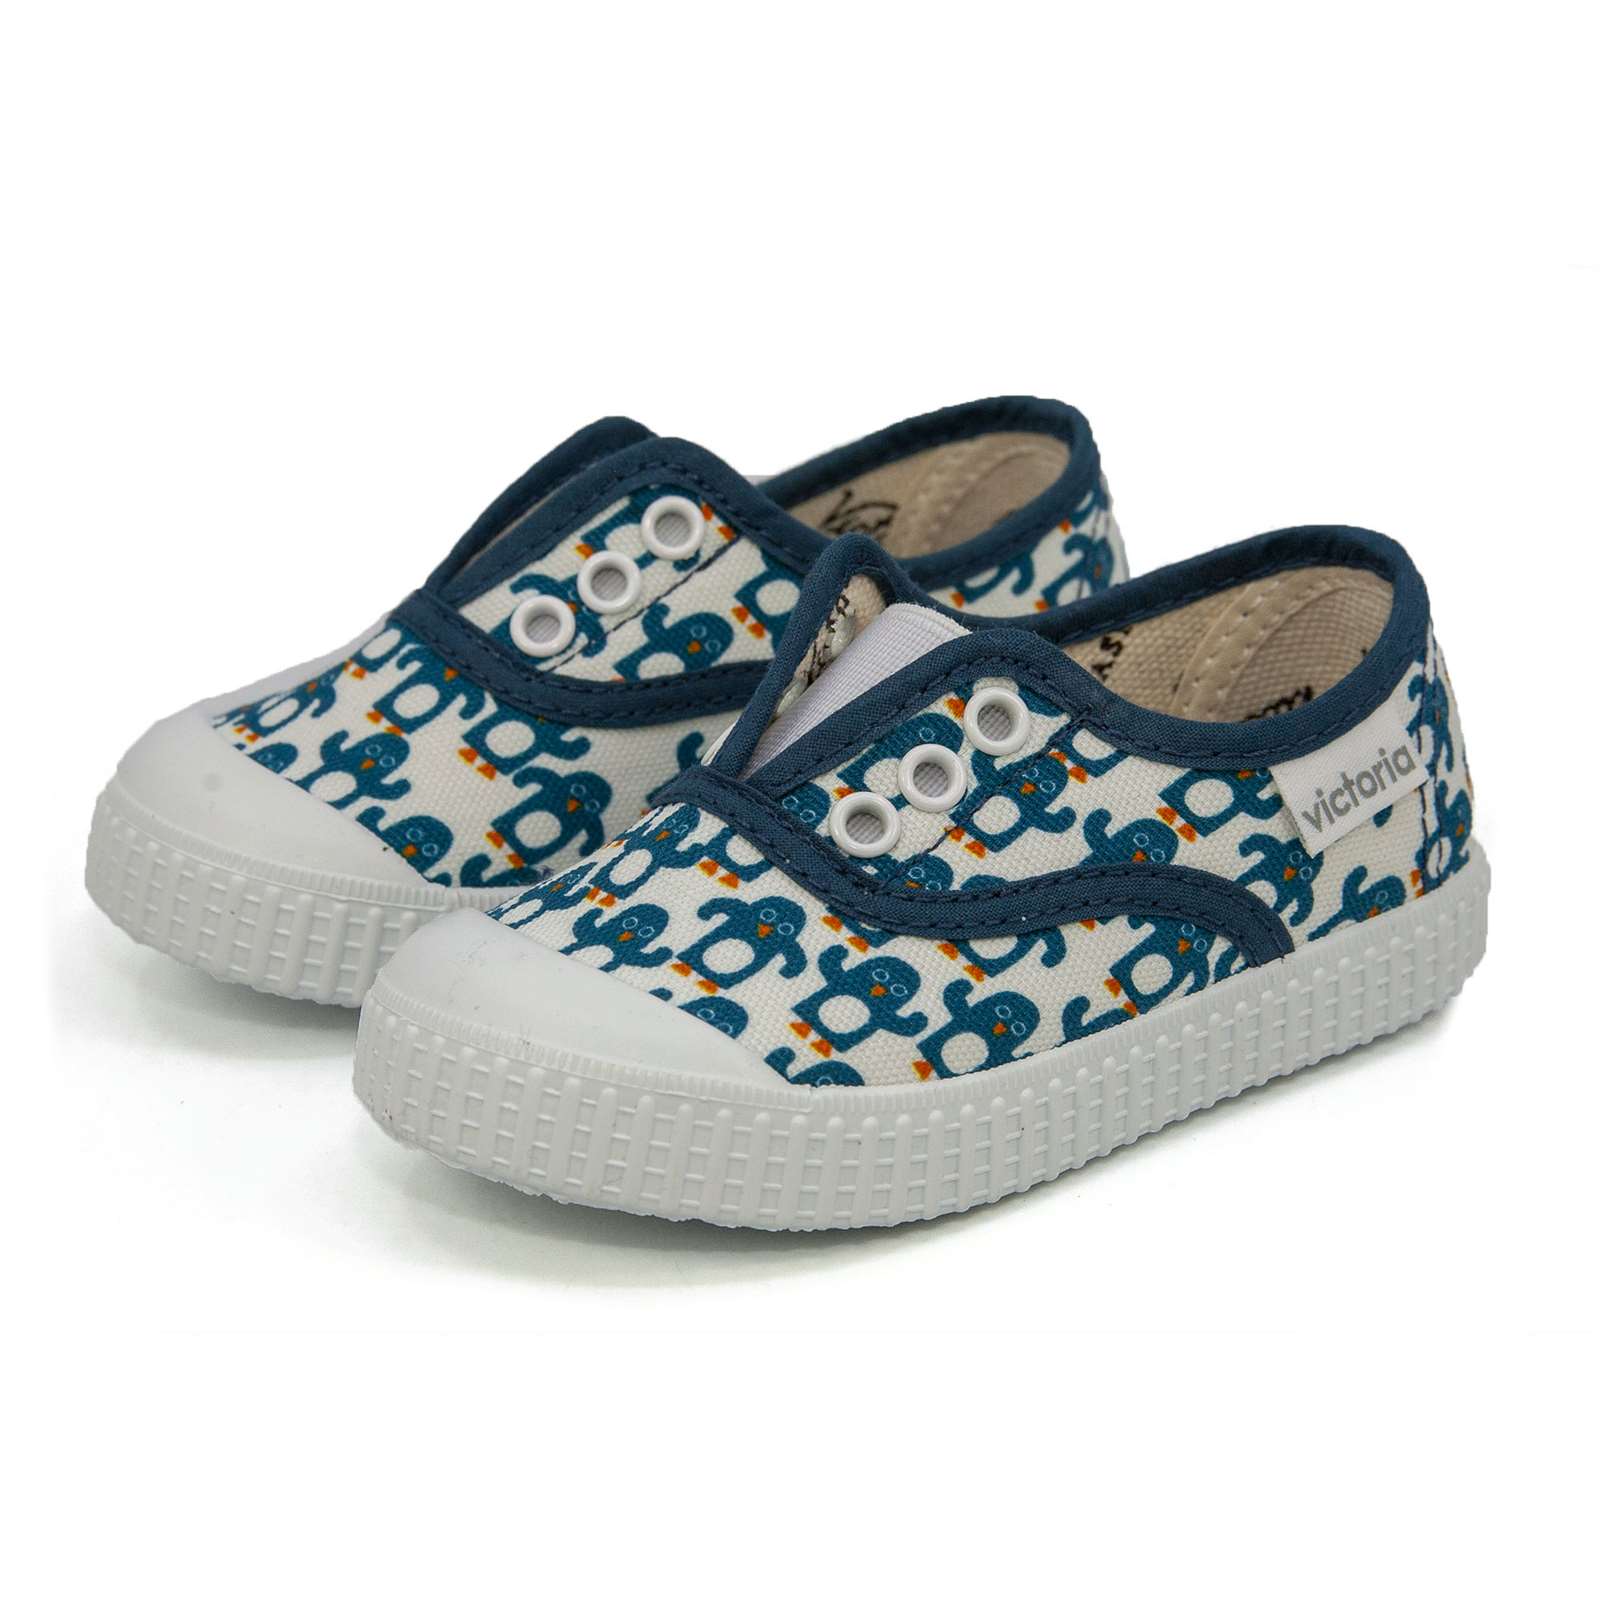 Victoria Girl Slip On Canvas Shoes